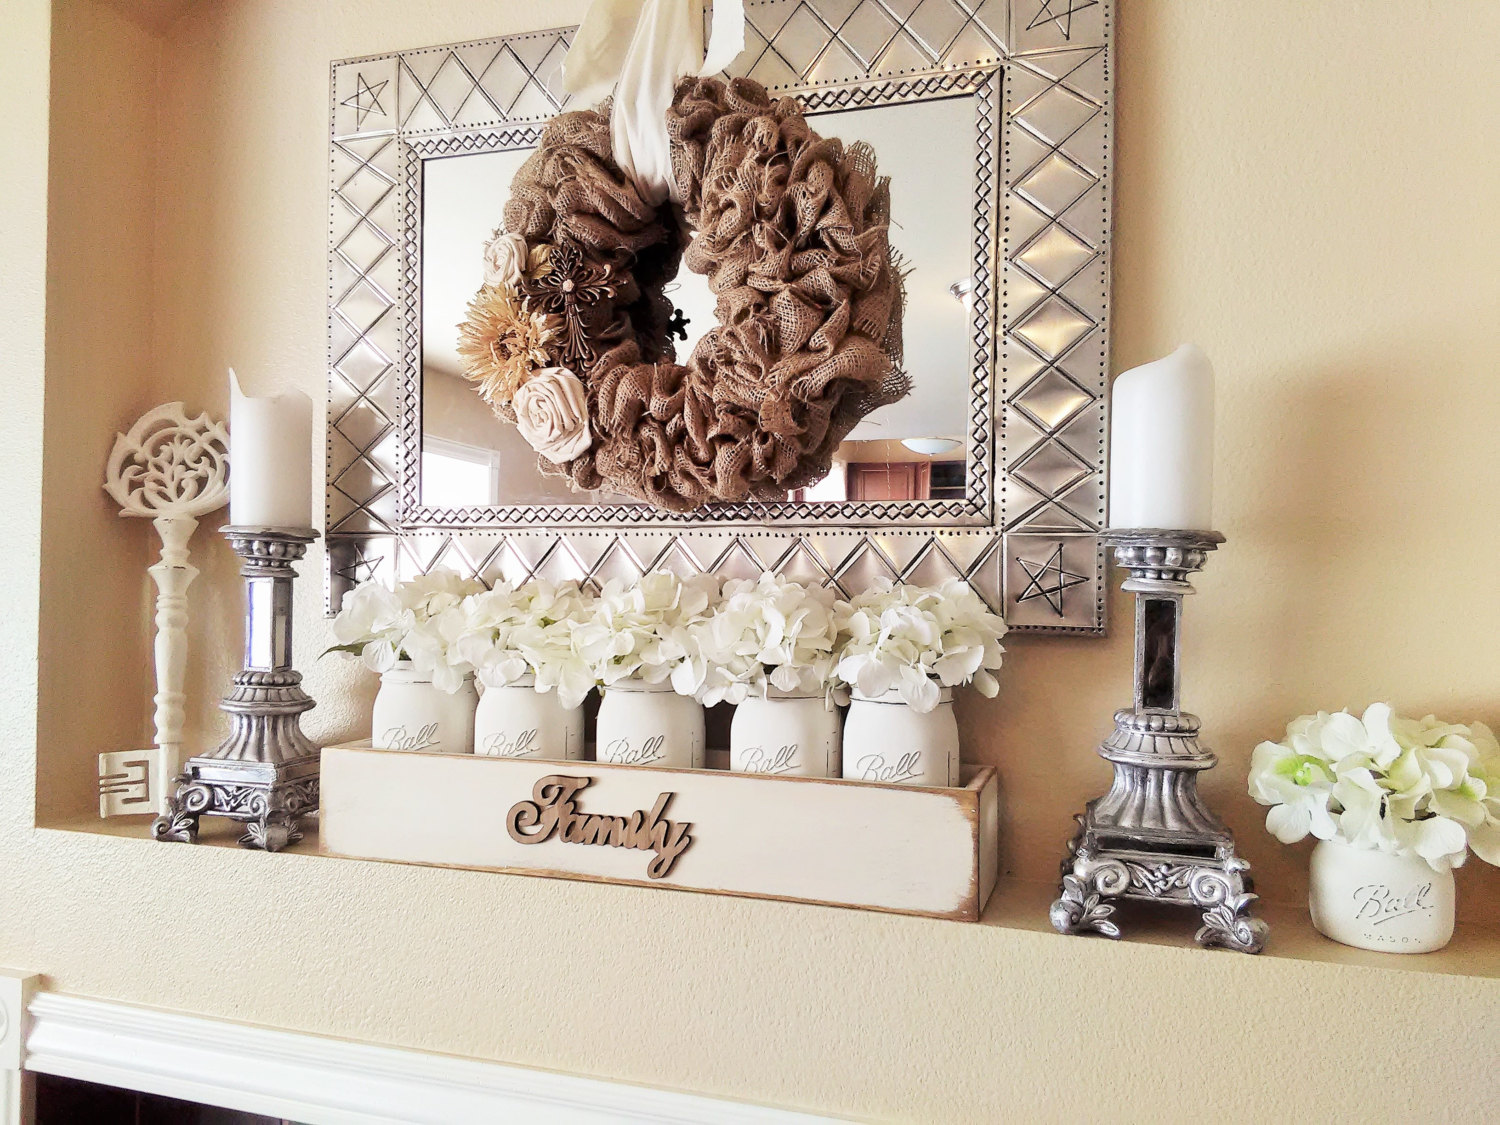 A mantel decorated with a burlap wreath and mason jars filled with flowers.